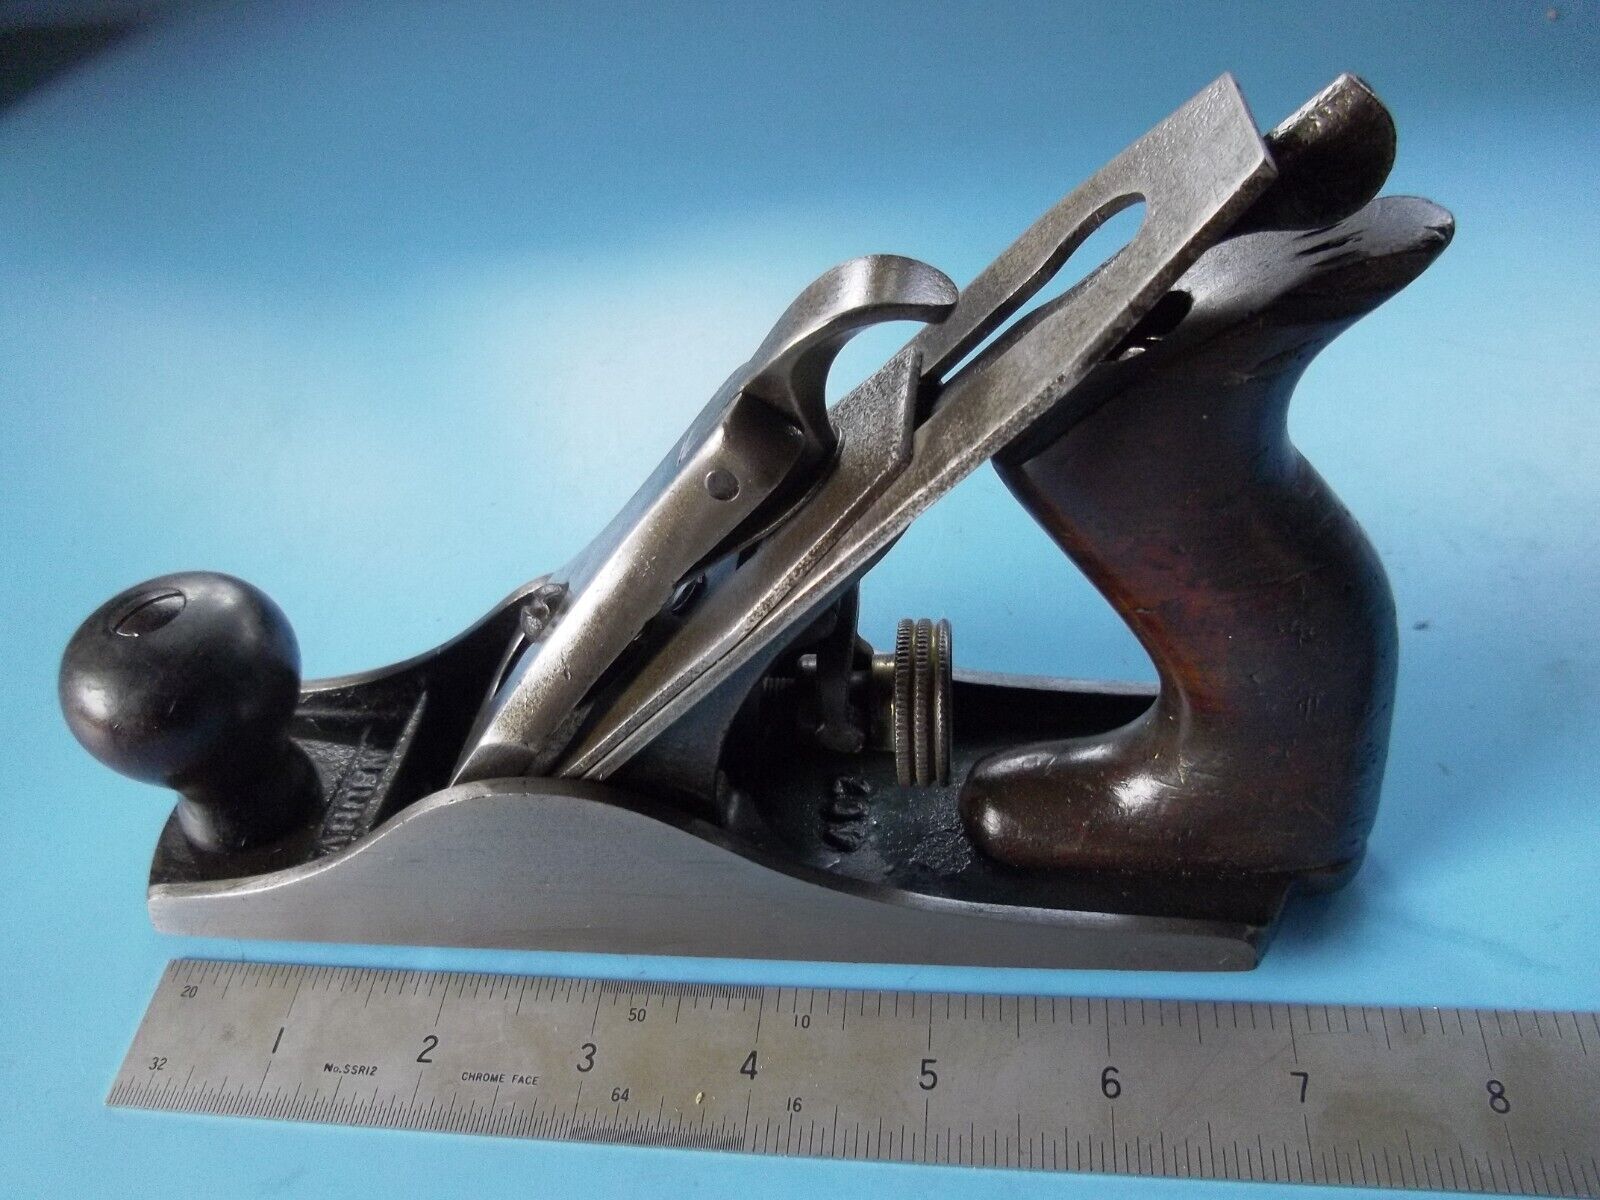 Sargent No.407 Small Smoothing Plane-Like Stanley No2 